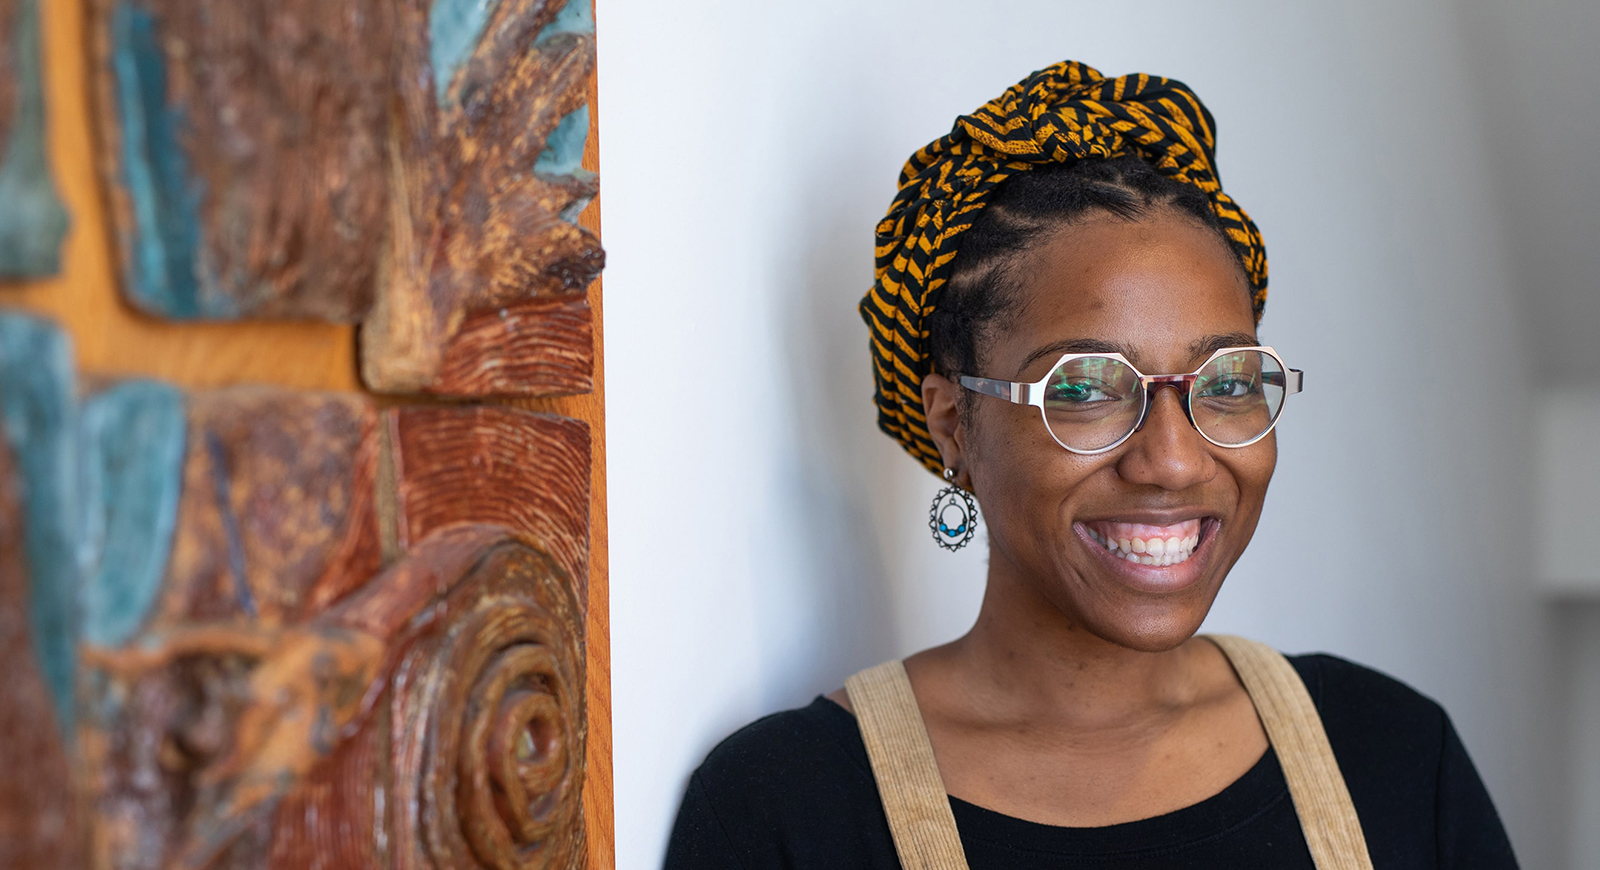 Headshot of Chatham University student Ciera Marie next to a hanging piece of artwork wearing a headscarf and glasses.